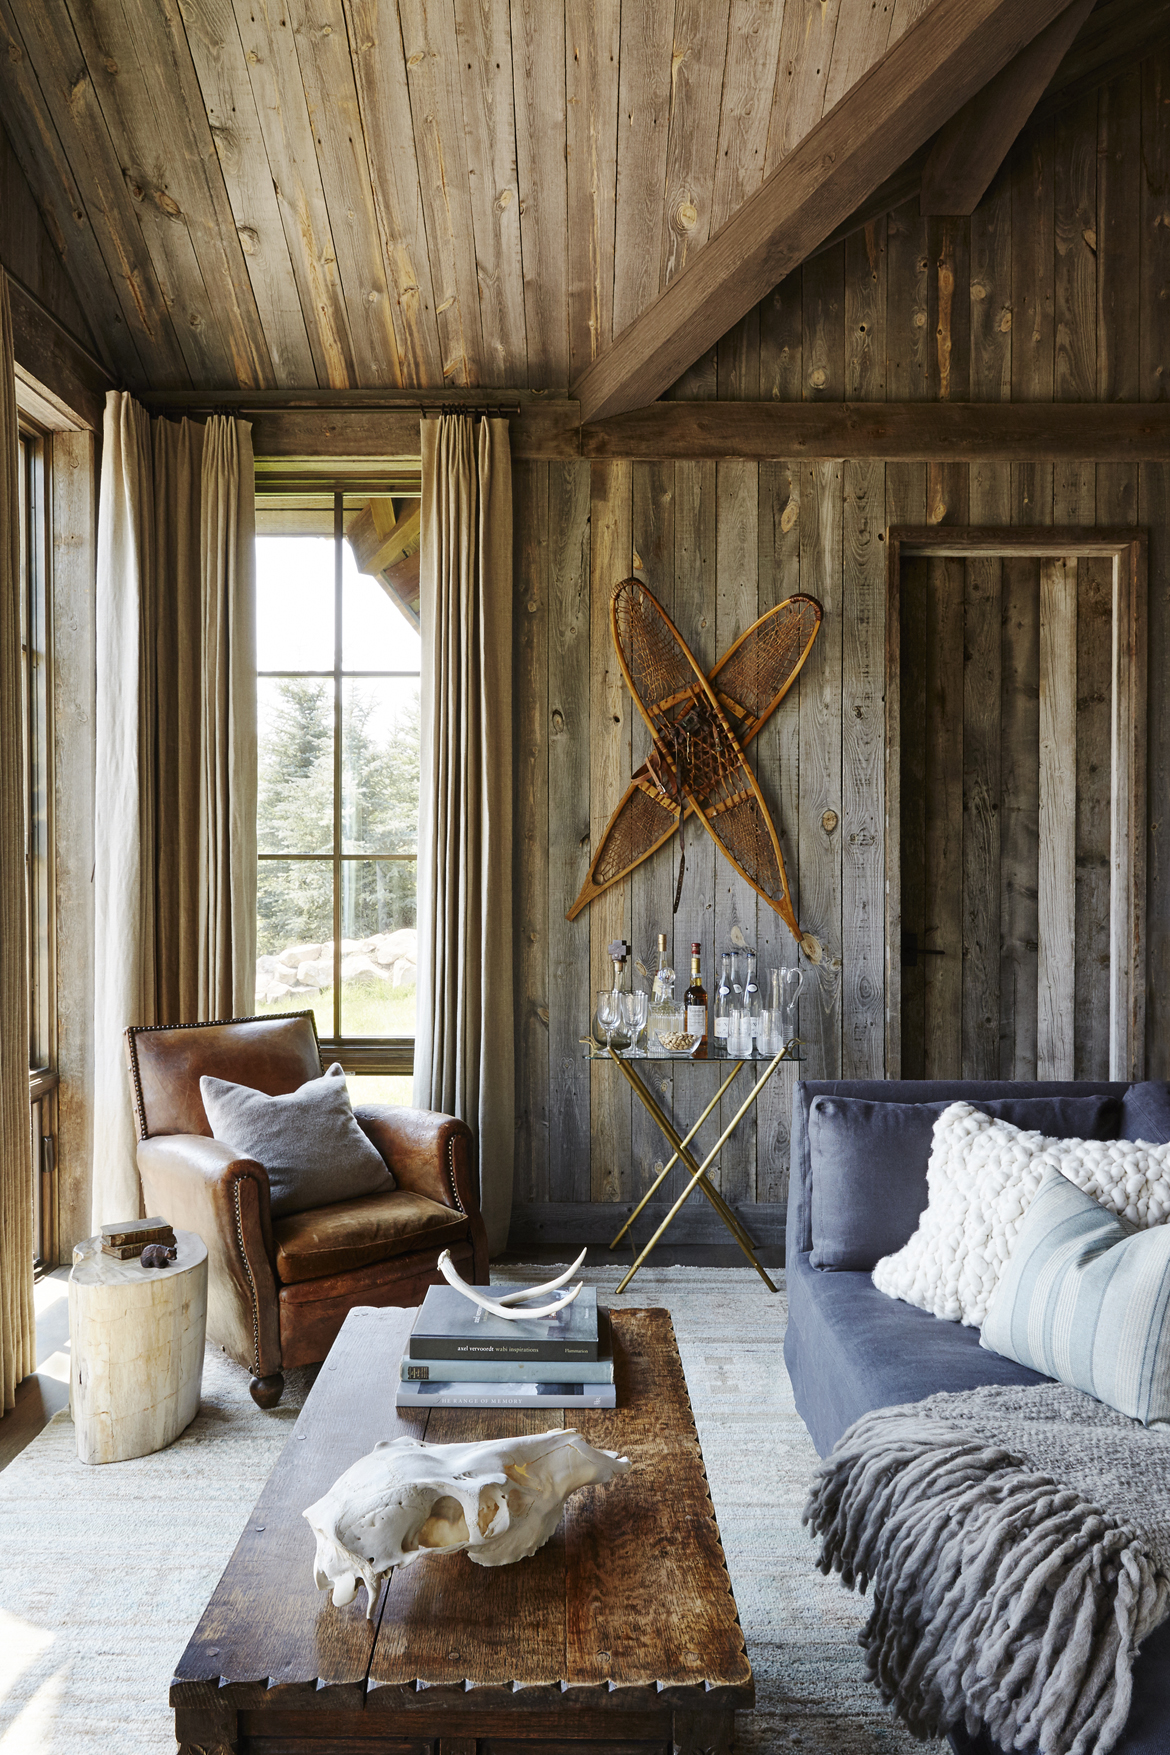 The rustic coziness in the living area of the WRJ-designed guest house plays on layers of texture such as the plush pillows, knotted throw and nubby woolen rug (photo by William Abranowicz).